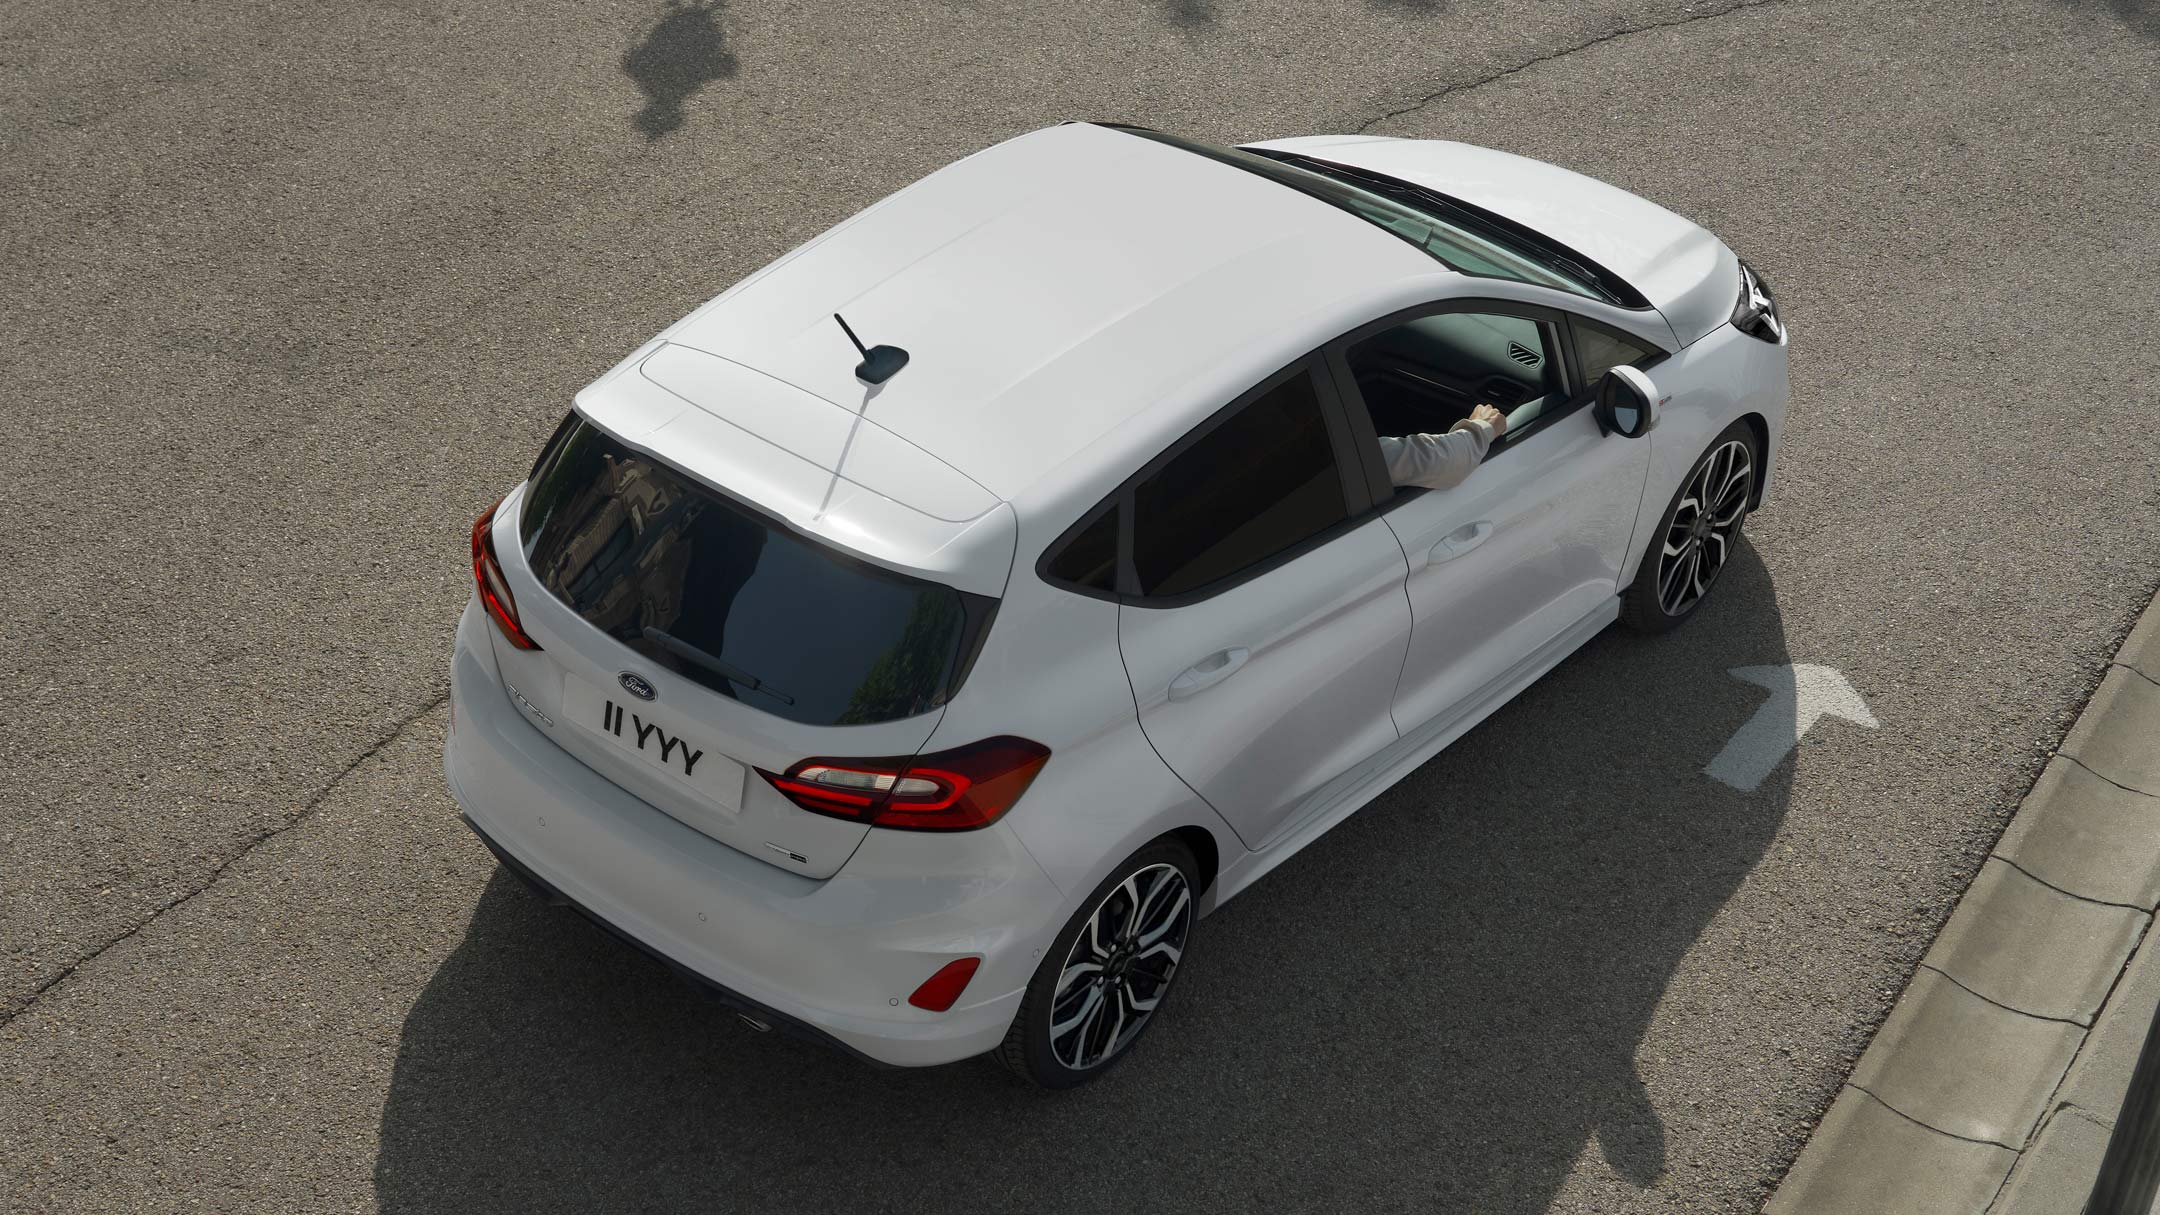 Ford Fiesta overhead view